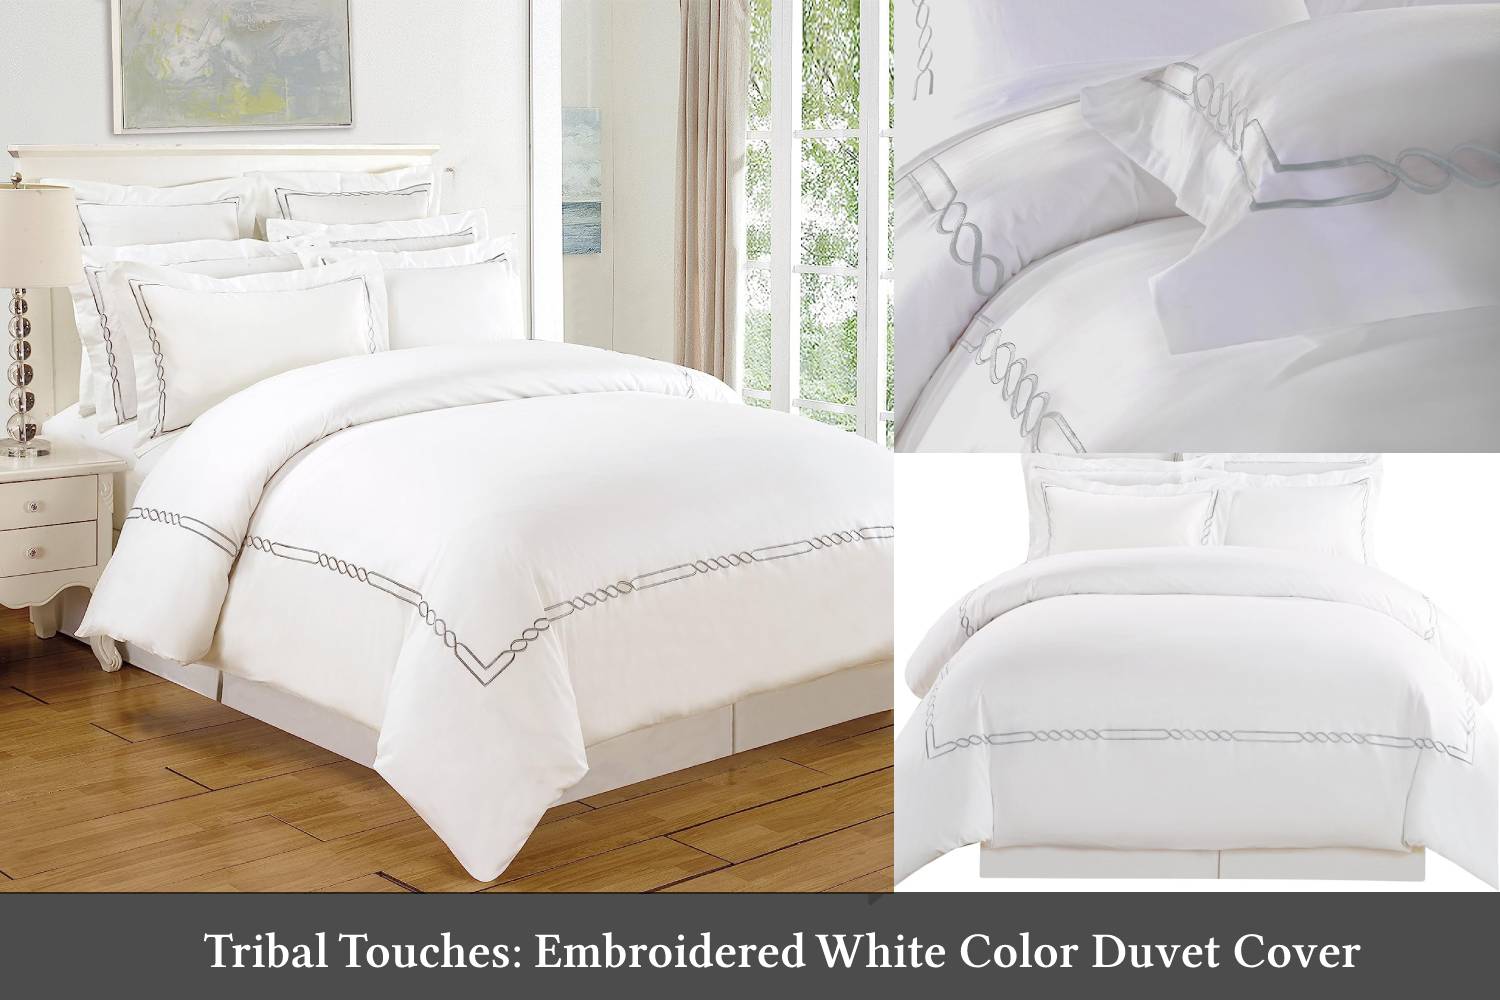 Tribal touches: Embroidered white color duvet cover